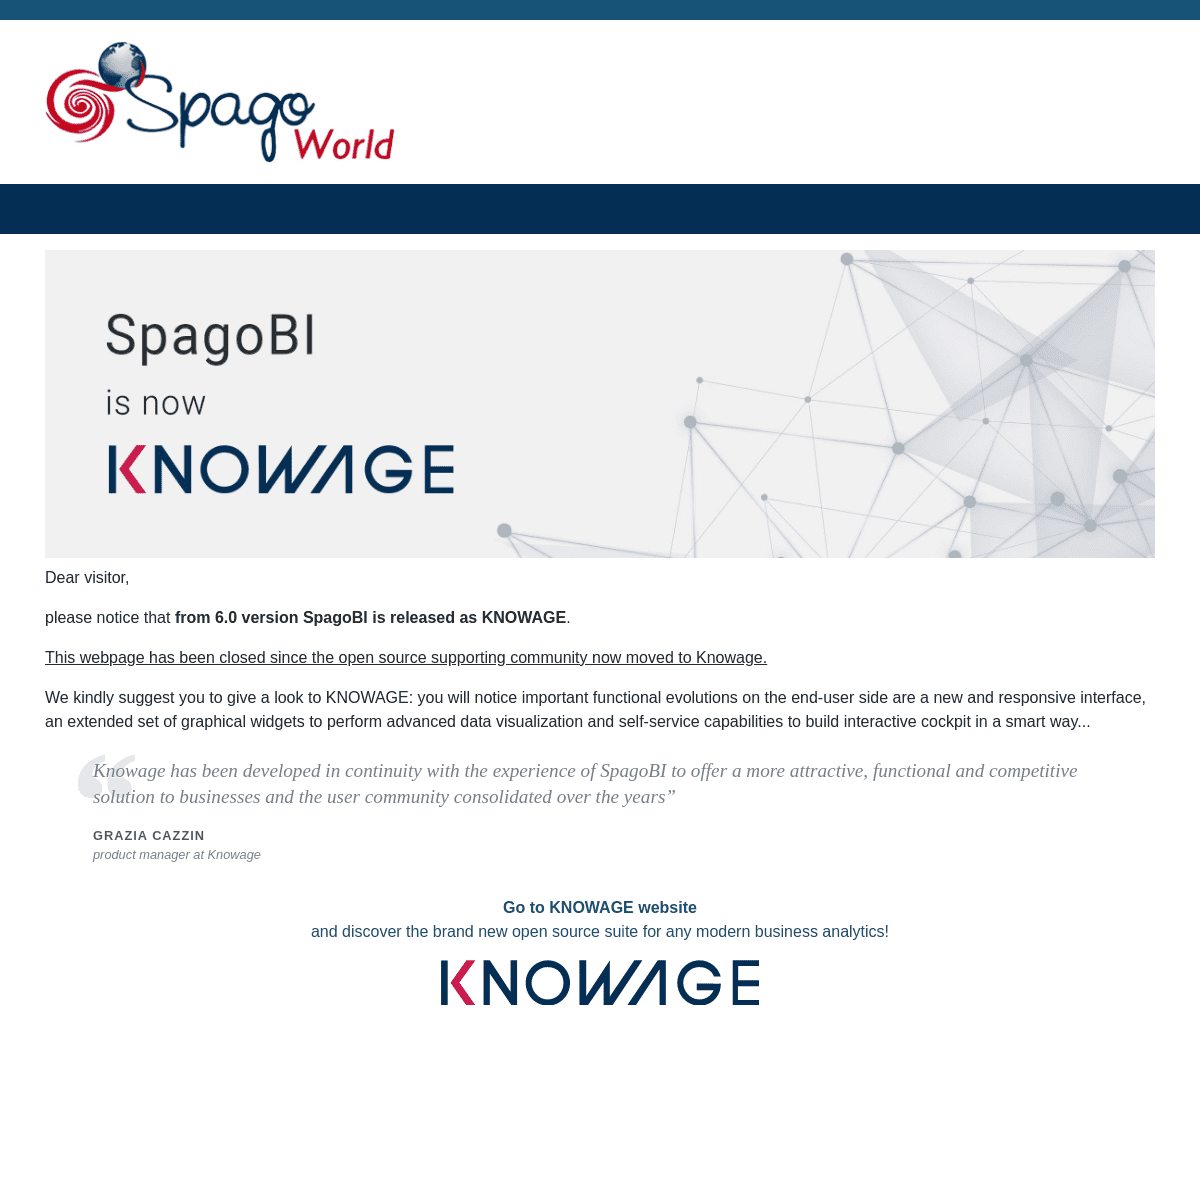 A complete backup of https://spagoworld.org